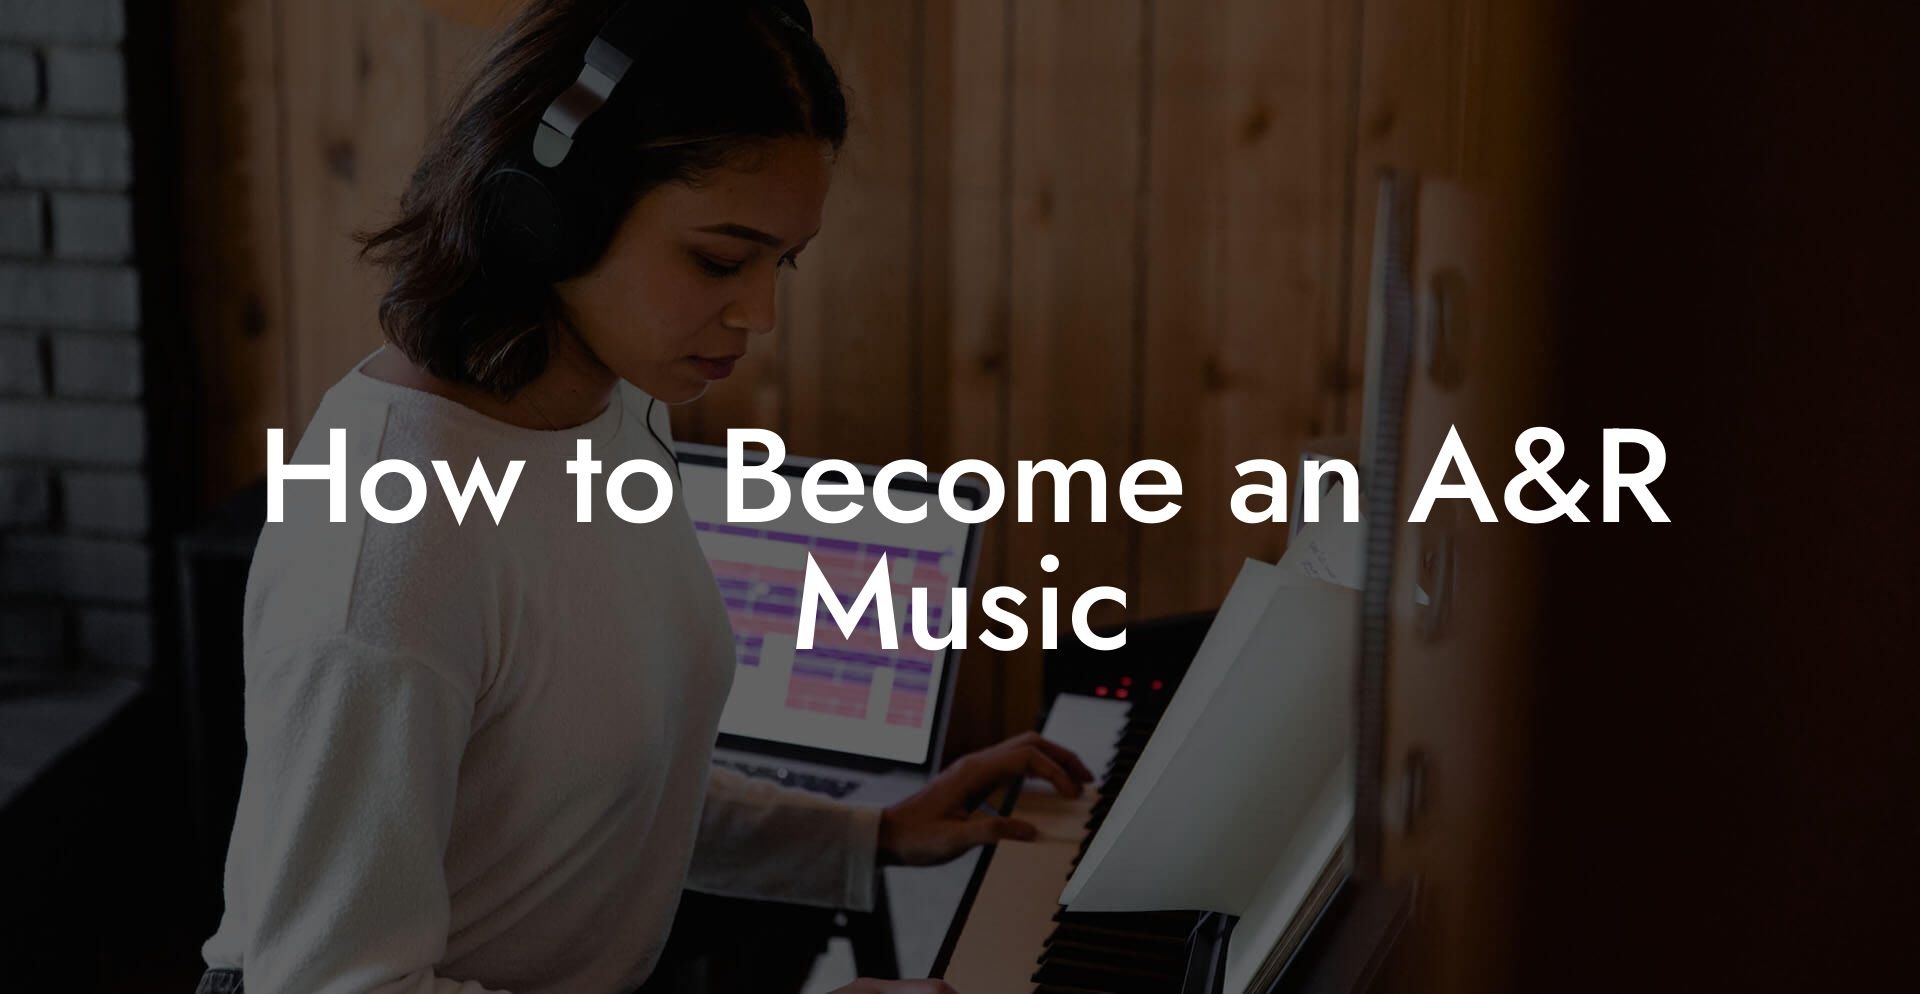 How to Become an A&R Music